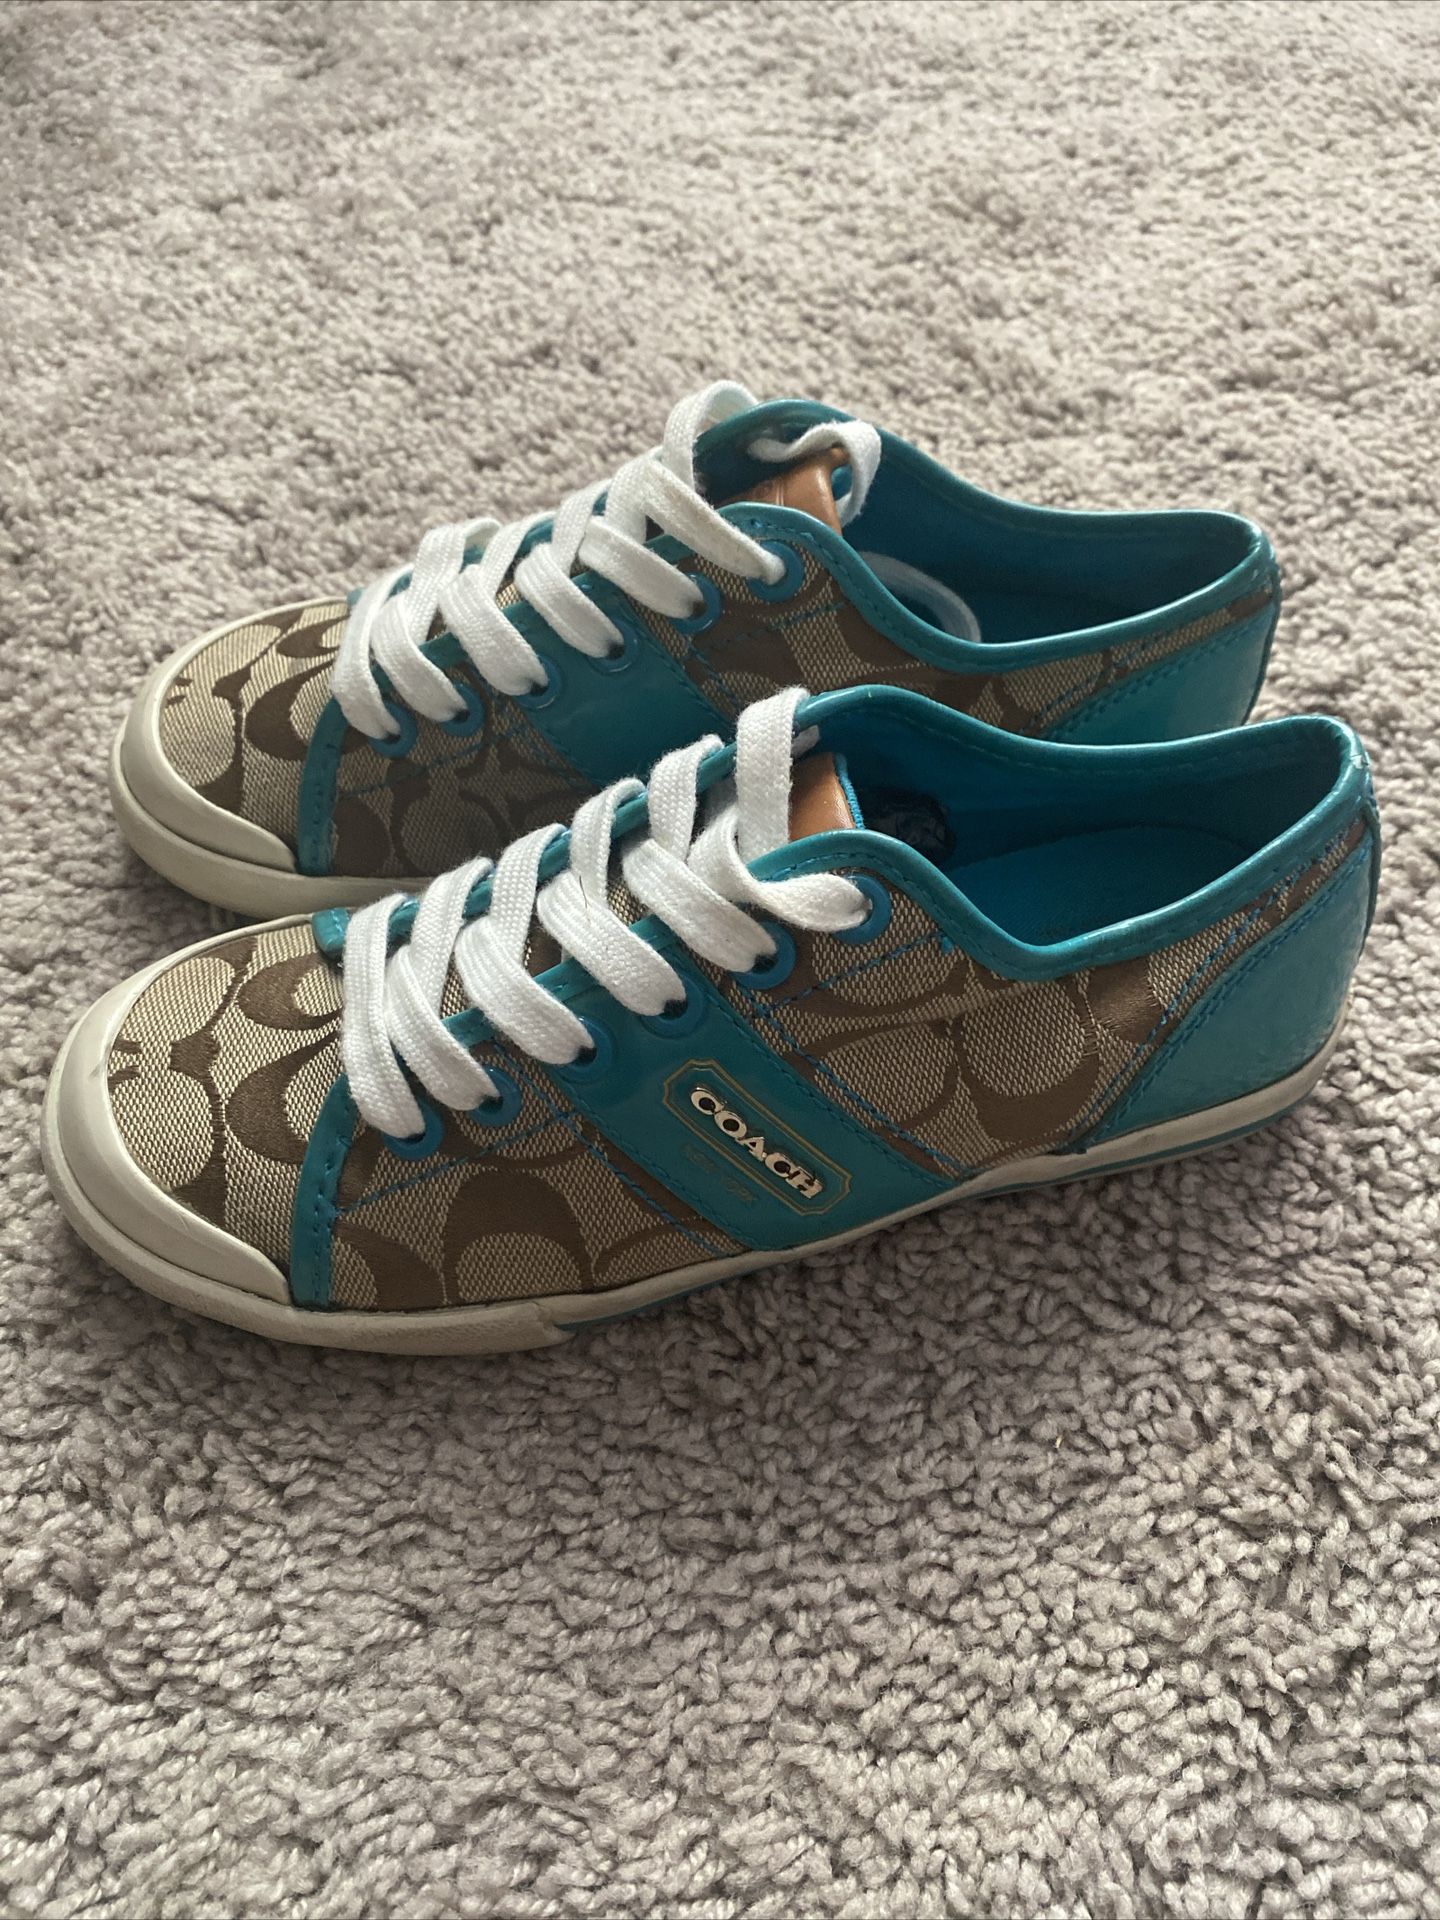 Limited Edition Coach New York Teal/brown Women’s Size 5US